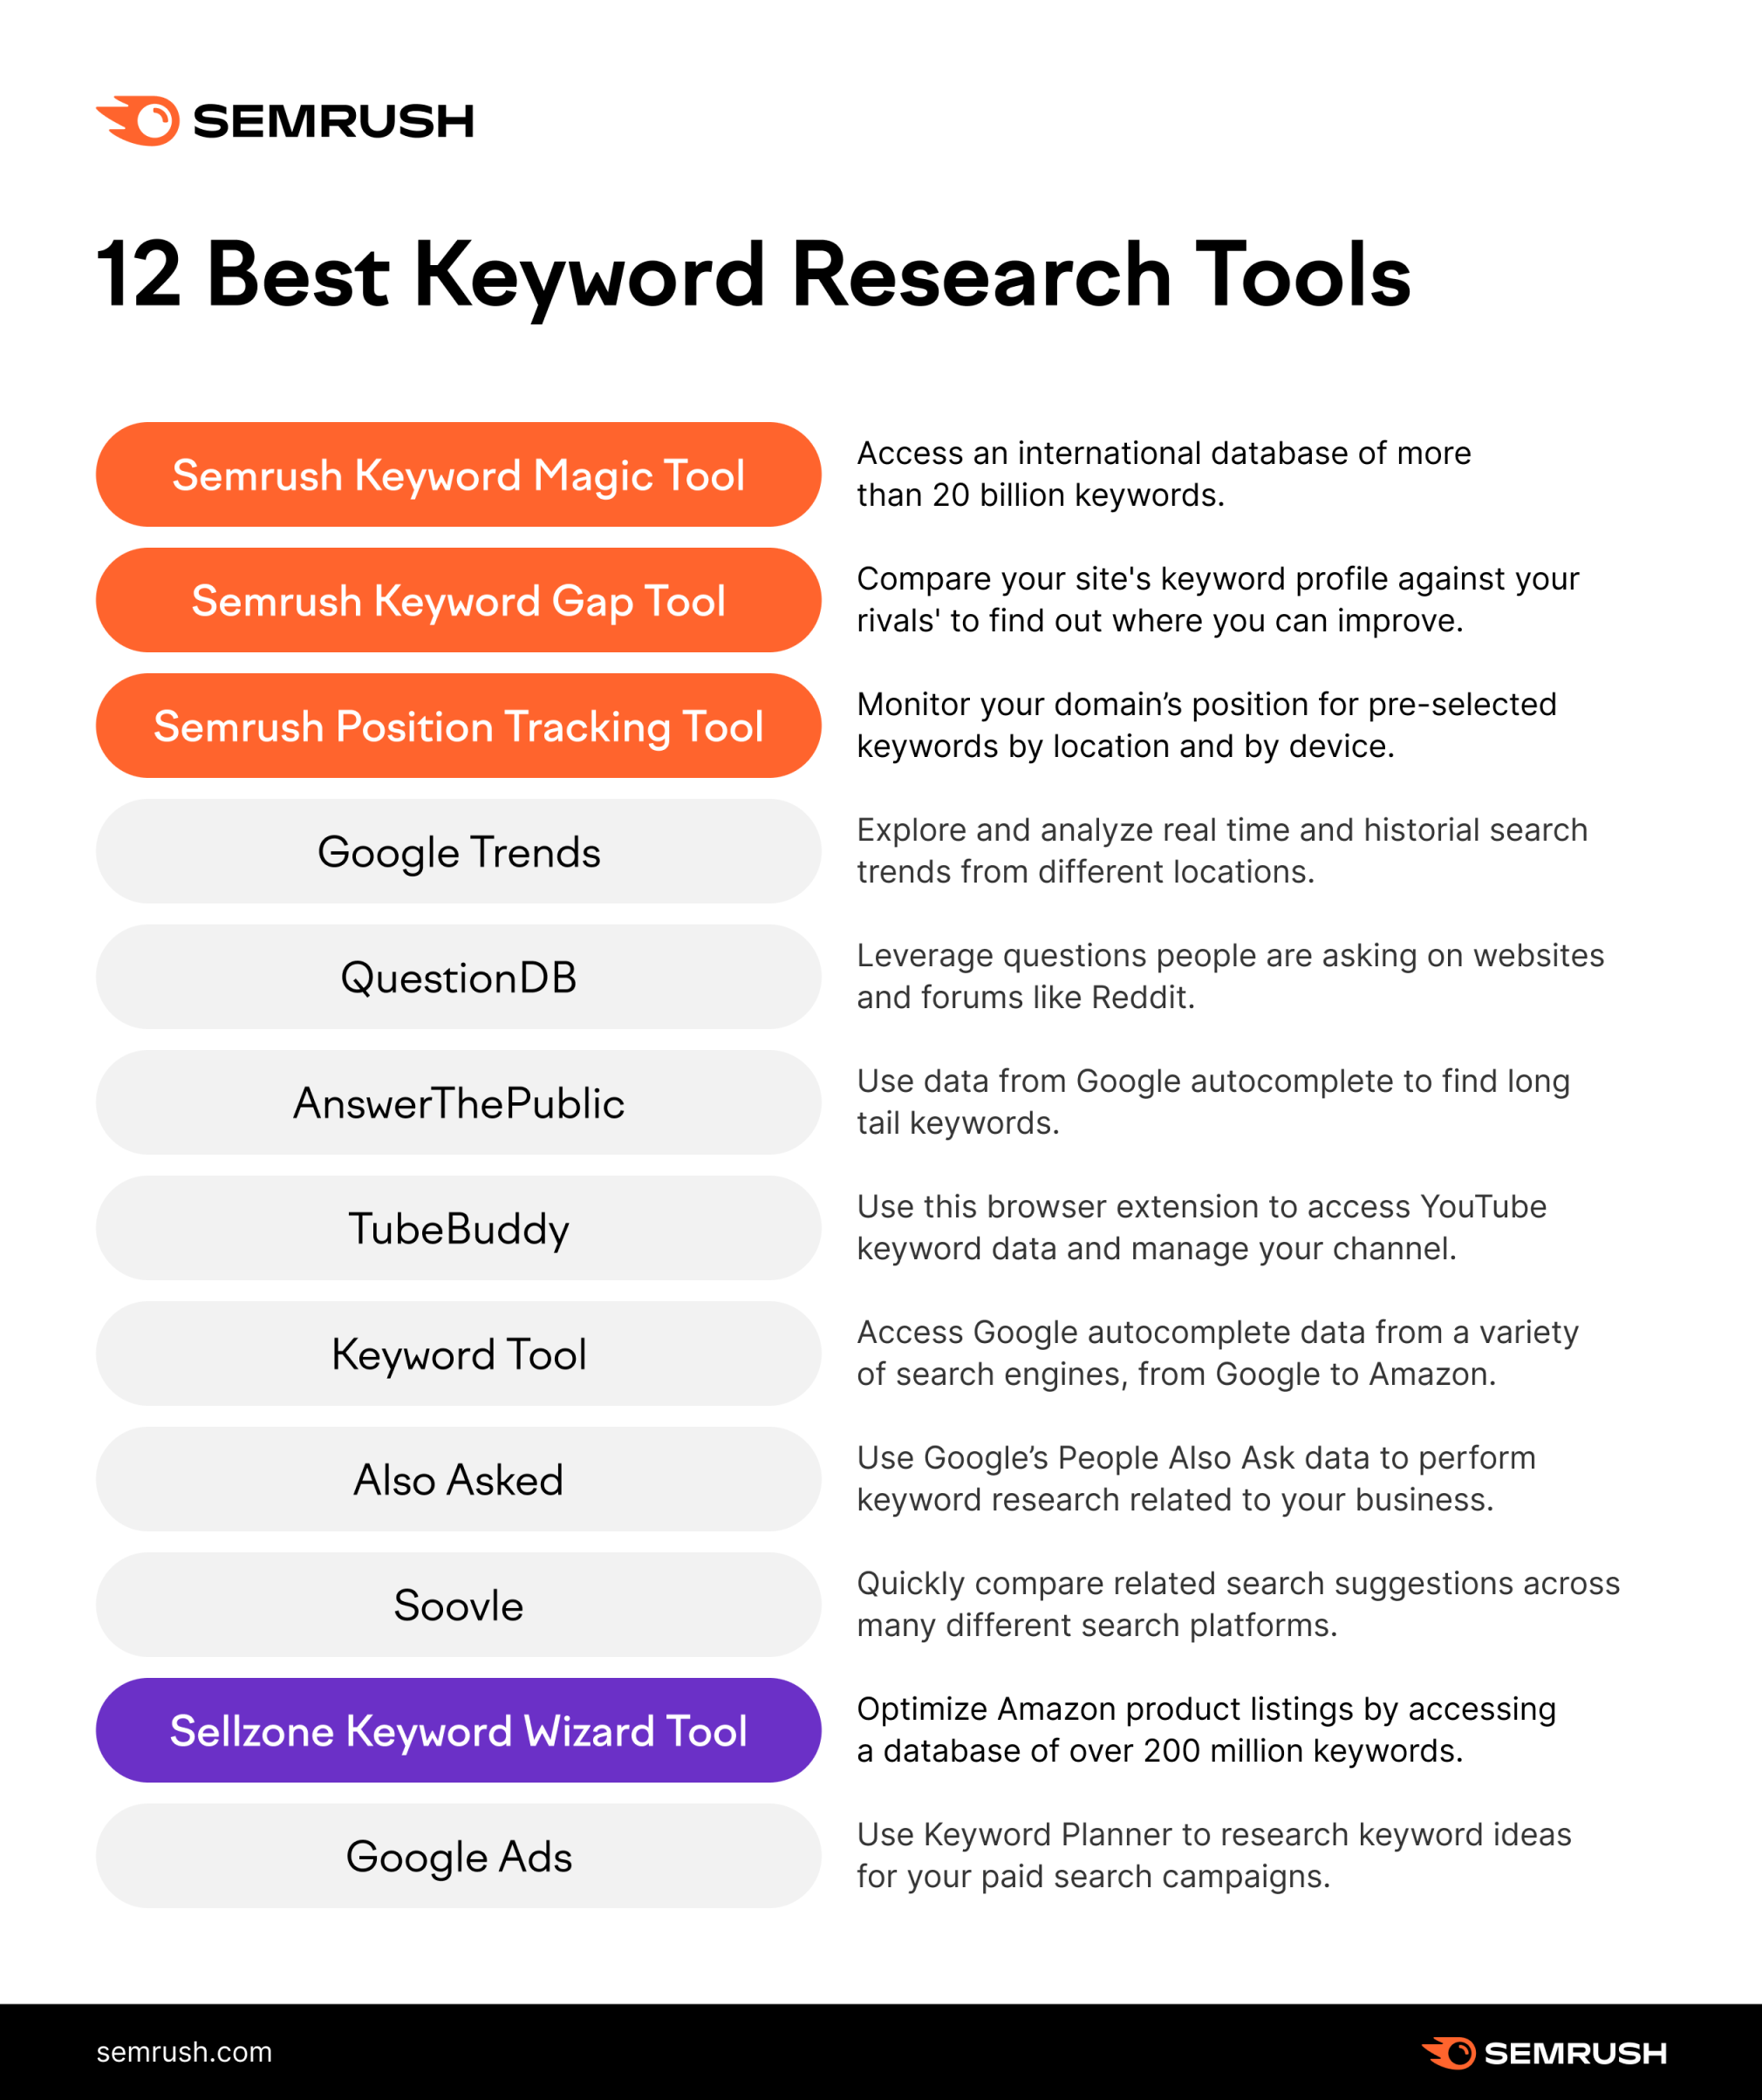 12 best keyword research tools